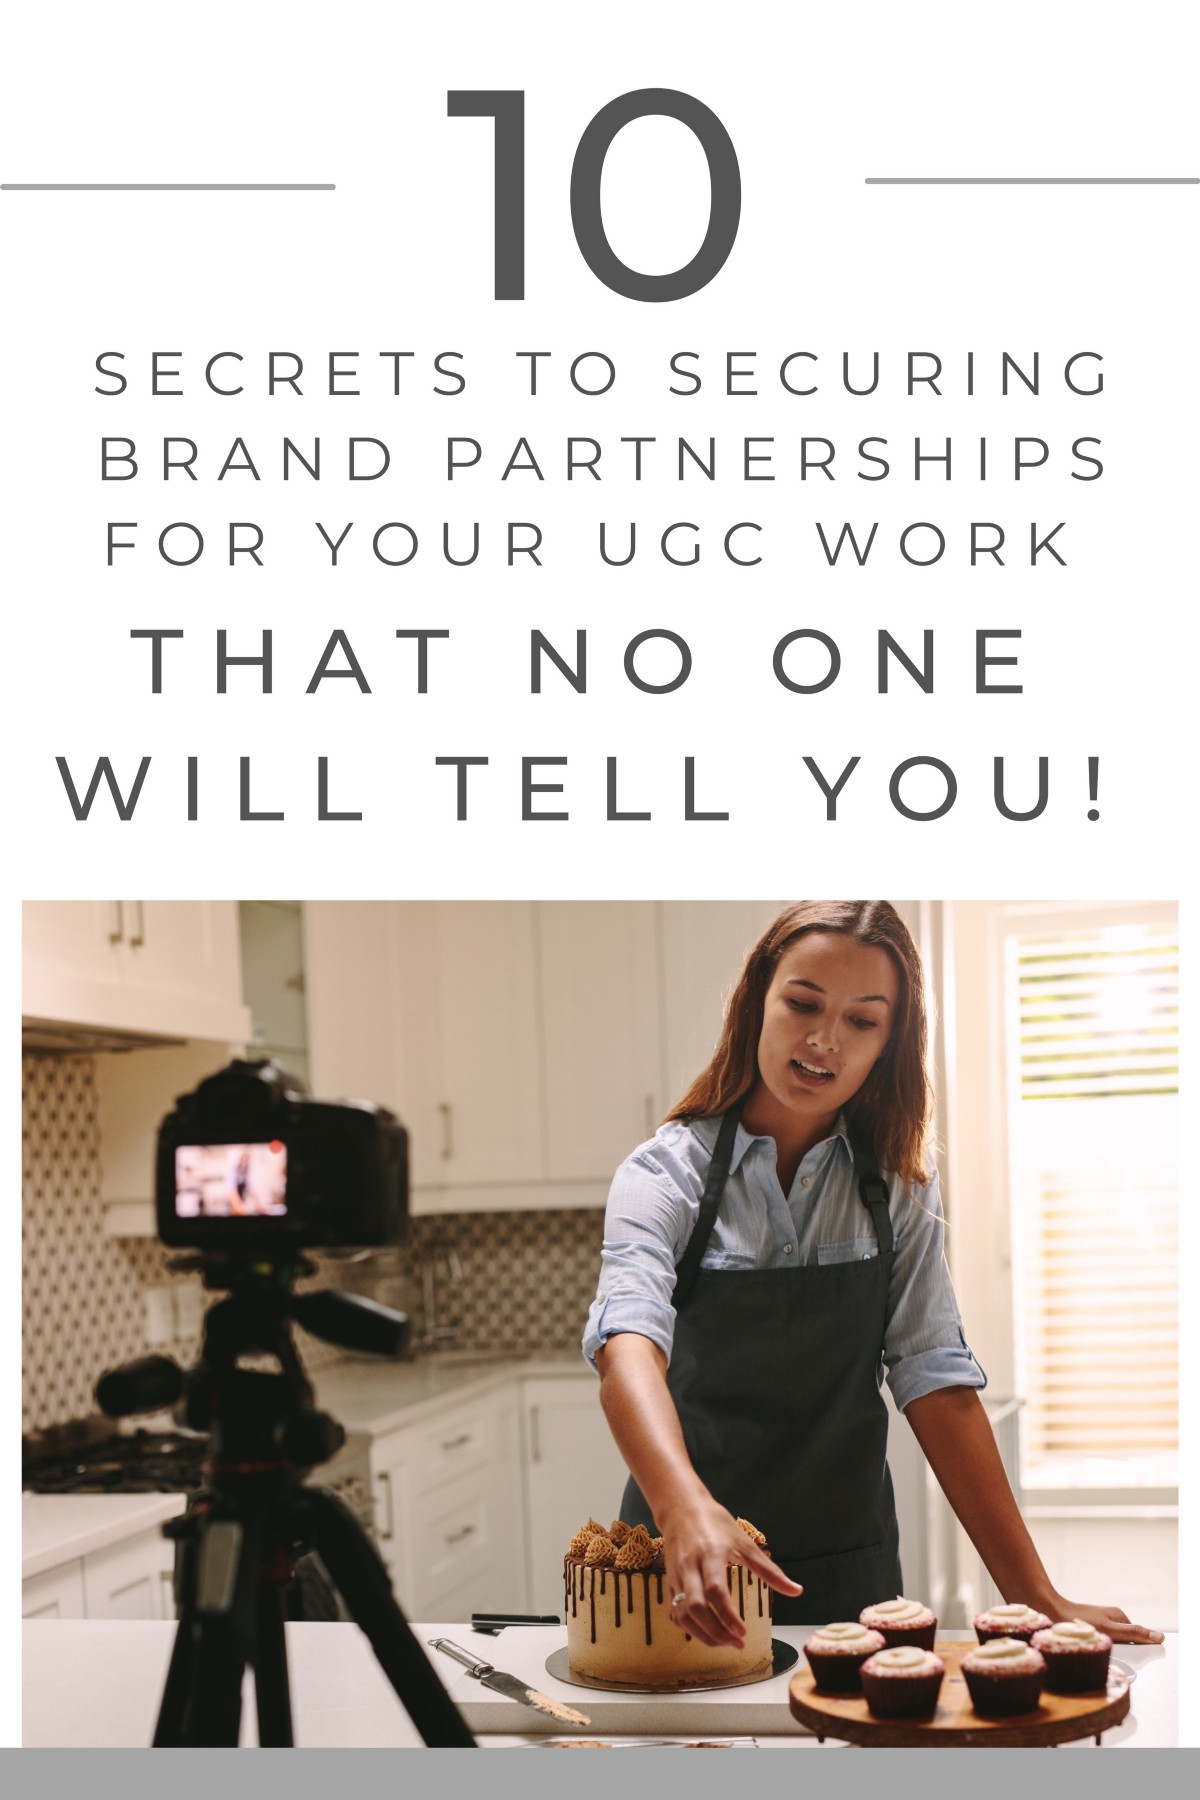 Are you looking for ways to secure brand partnerships for your user-generated content (UGC) work?